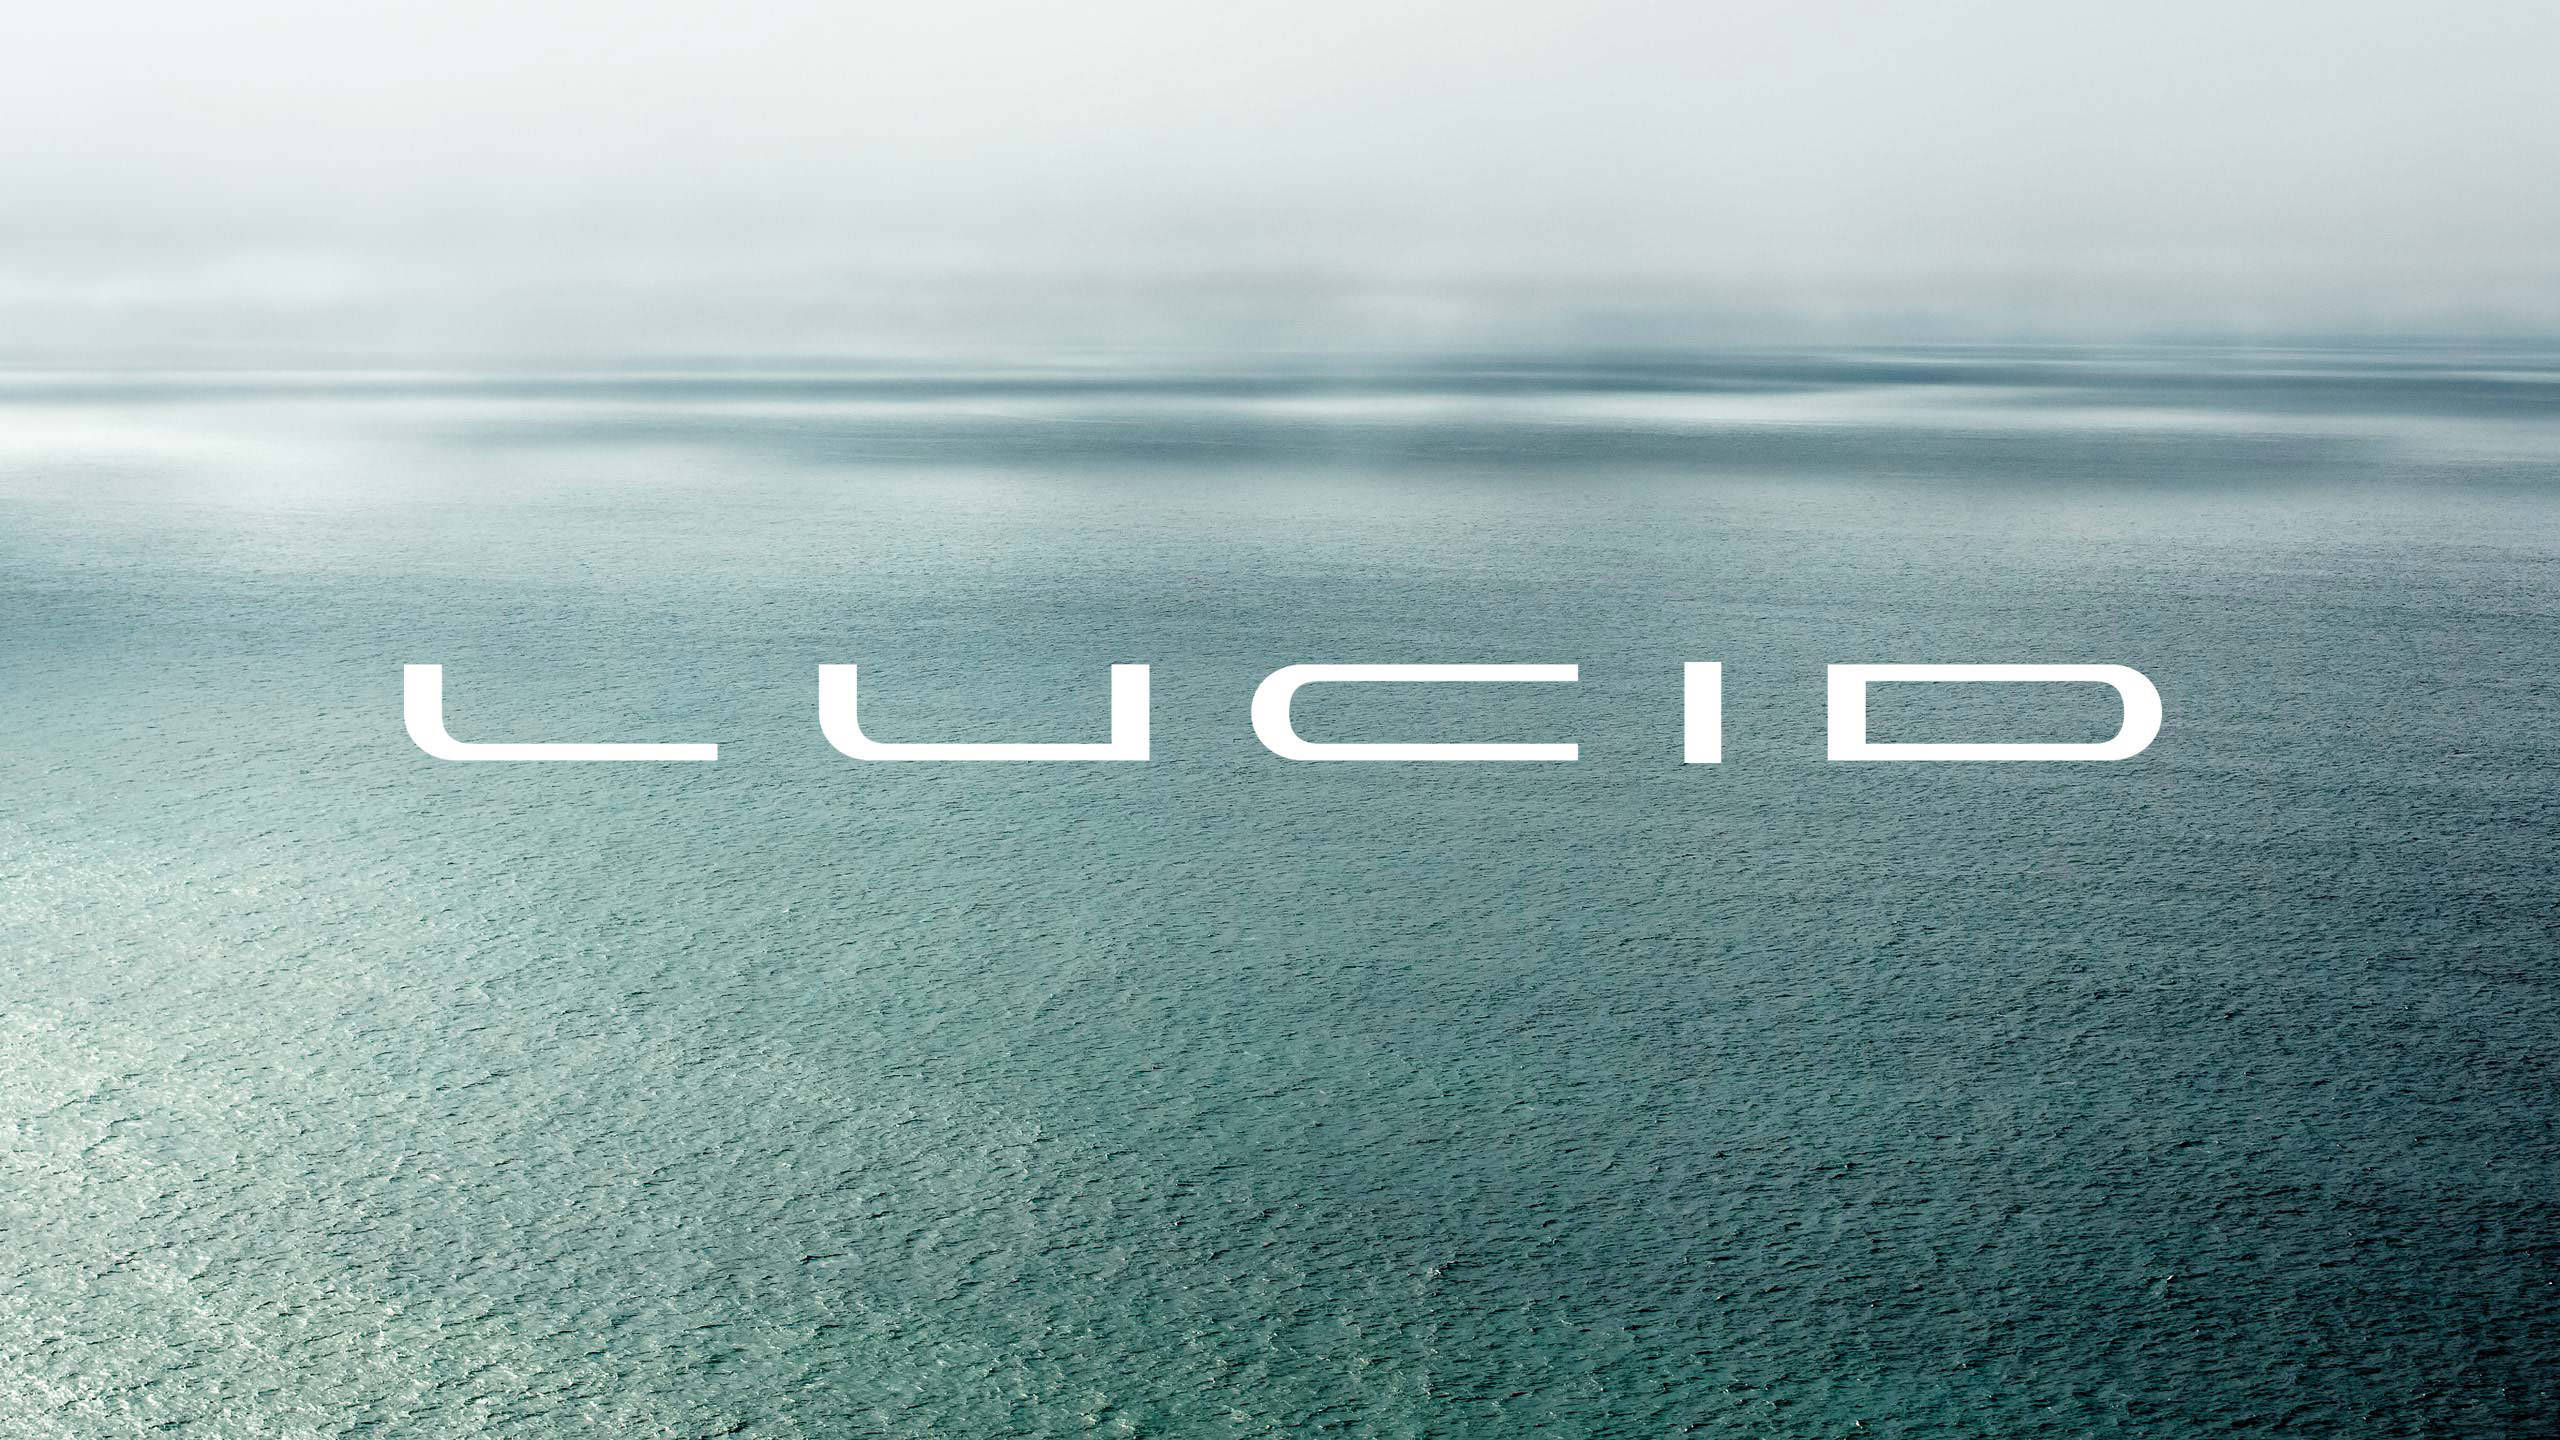 Building the Lucid Motors Brand - Tolleson